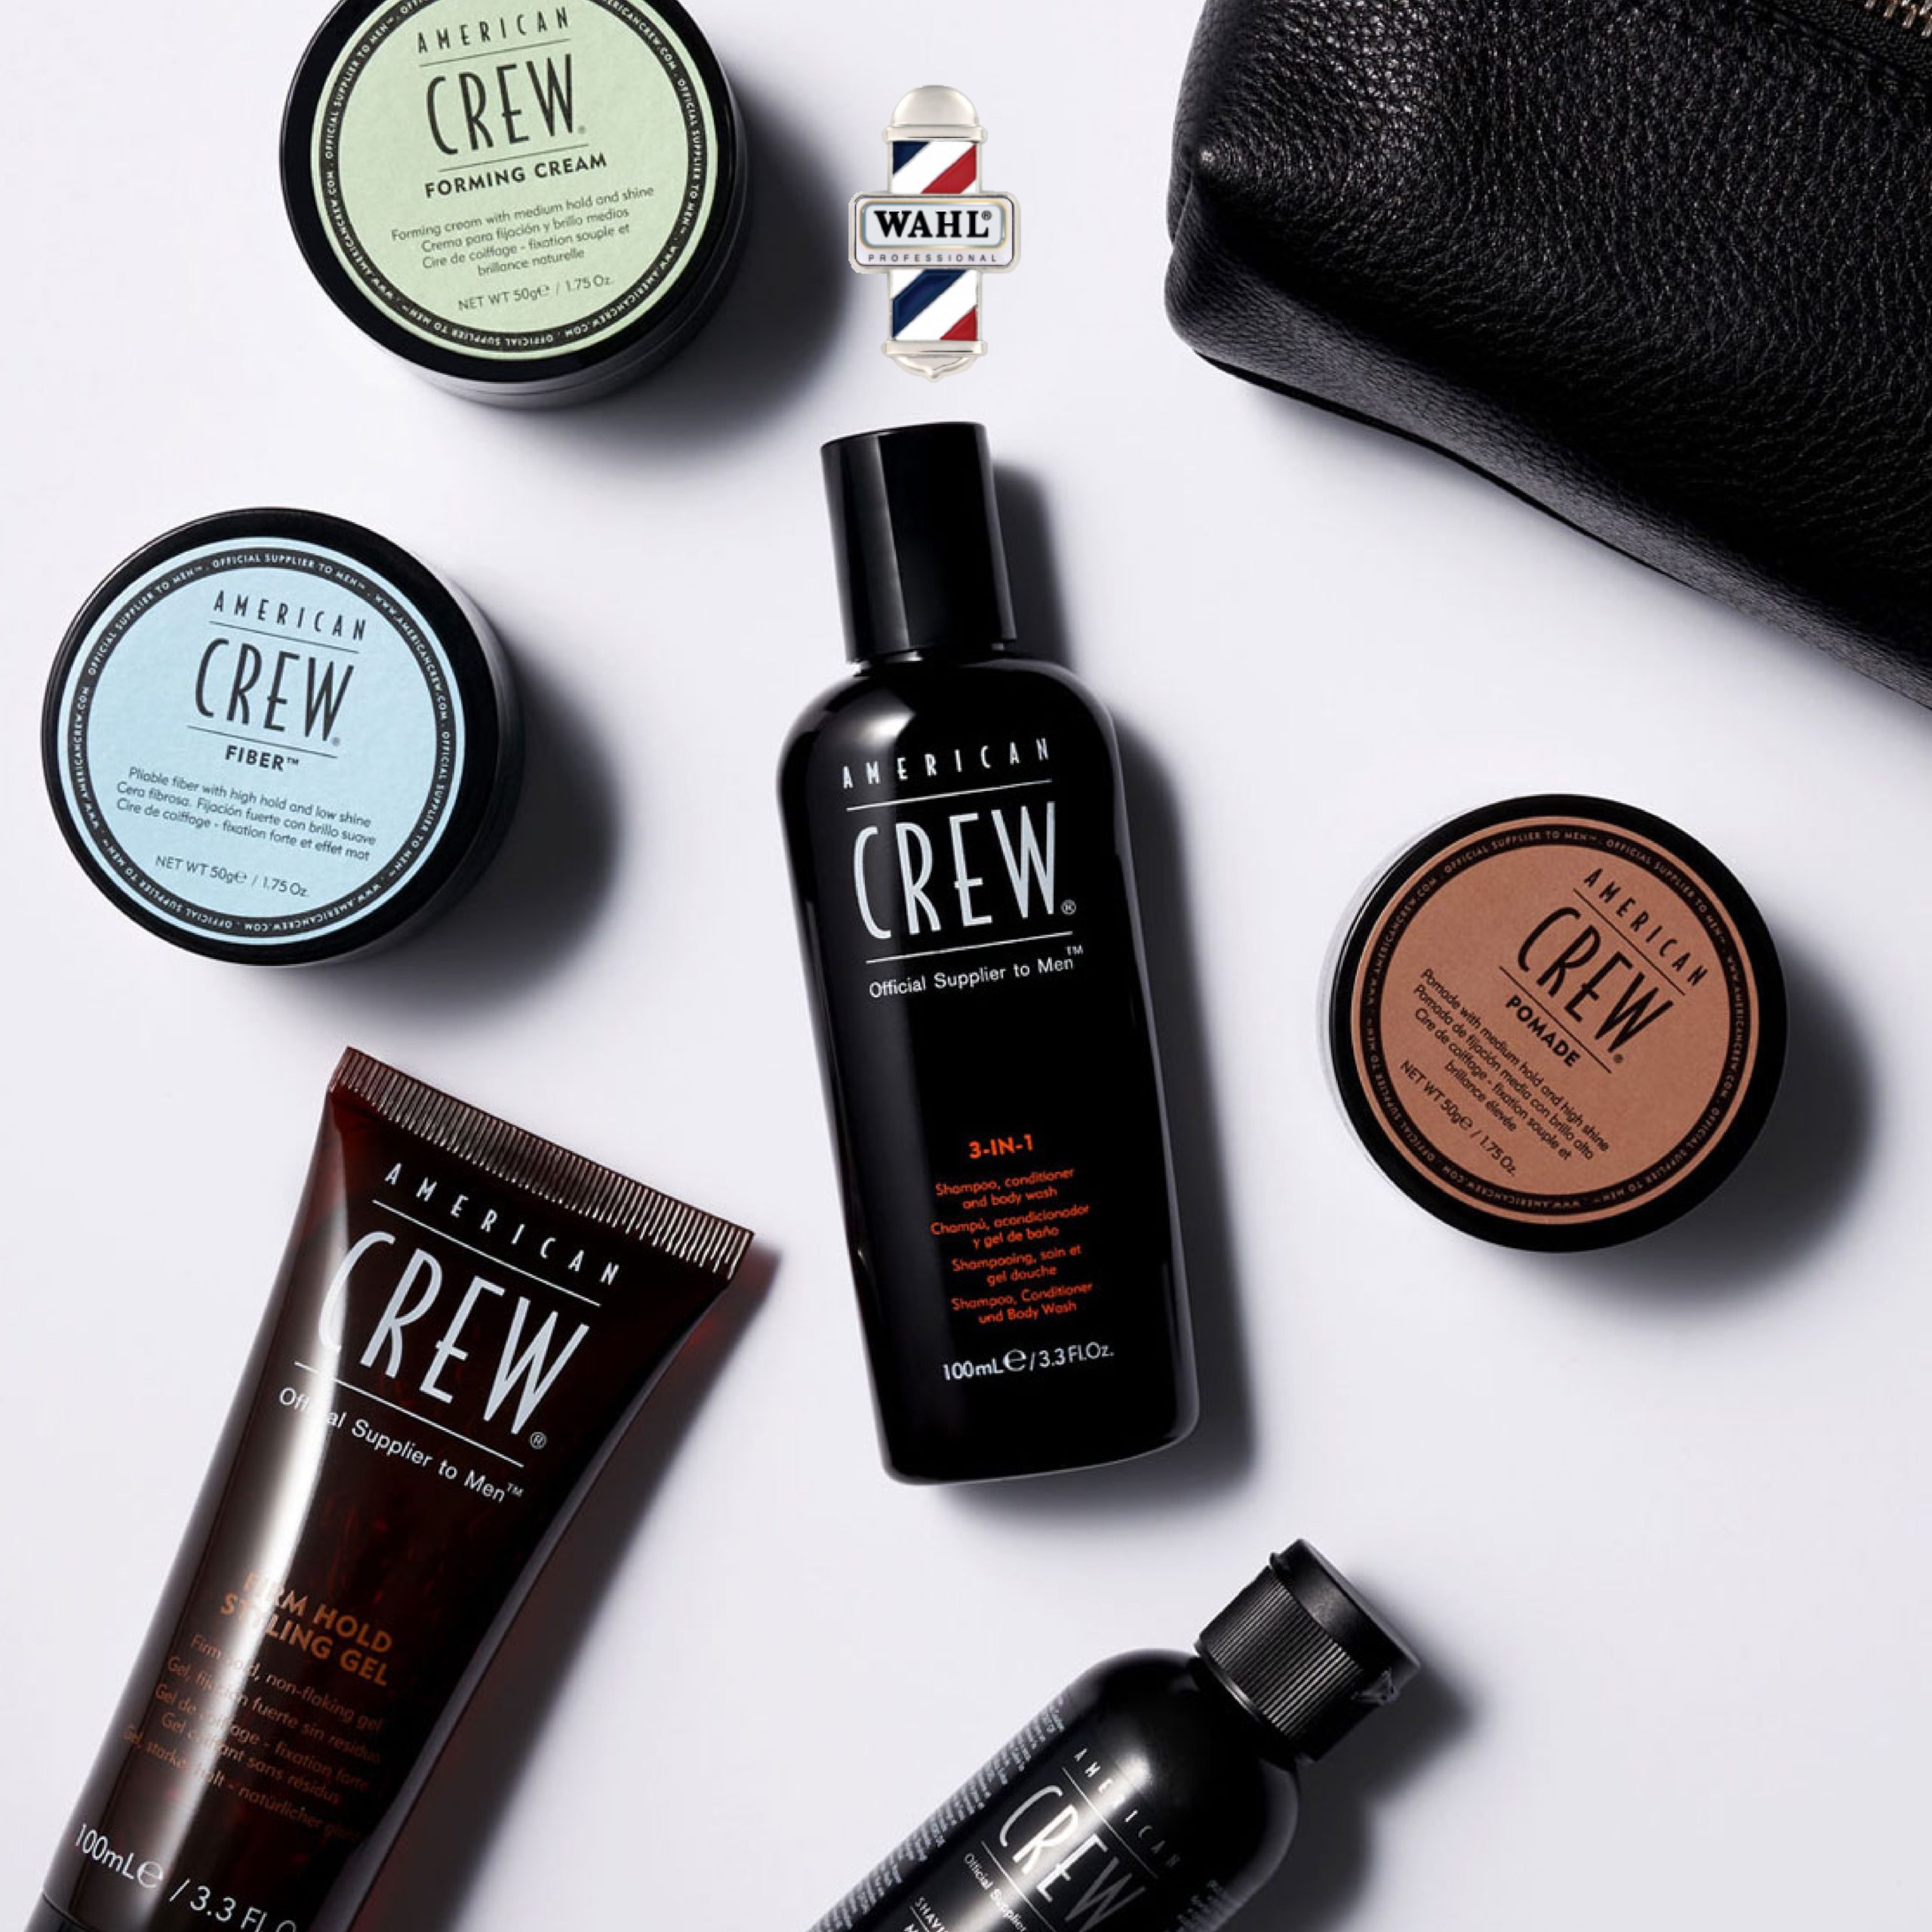 American crew products